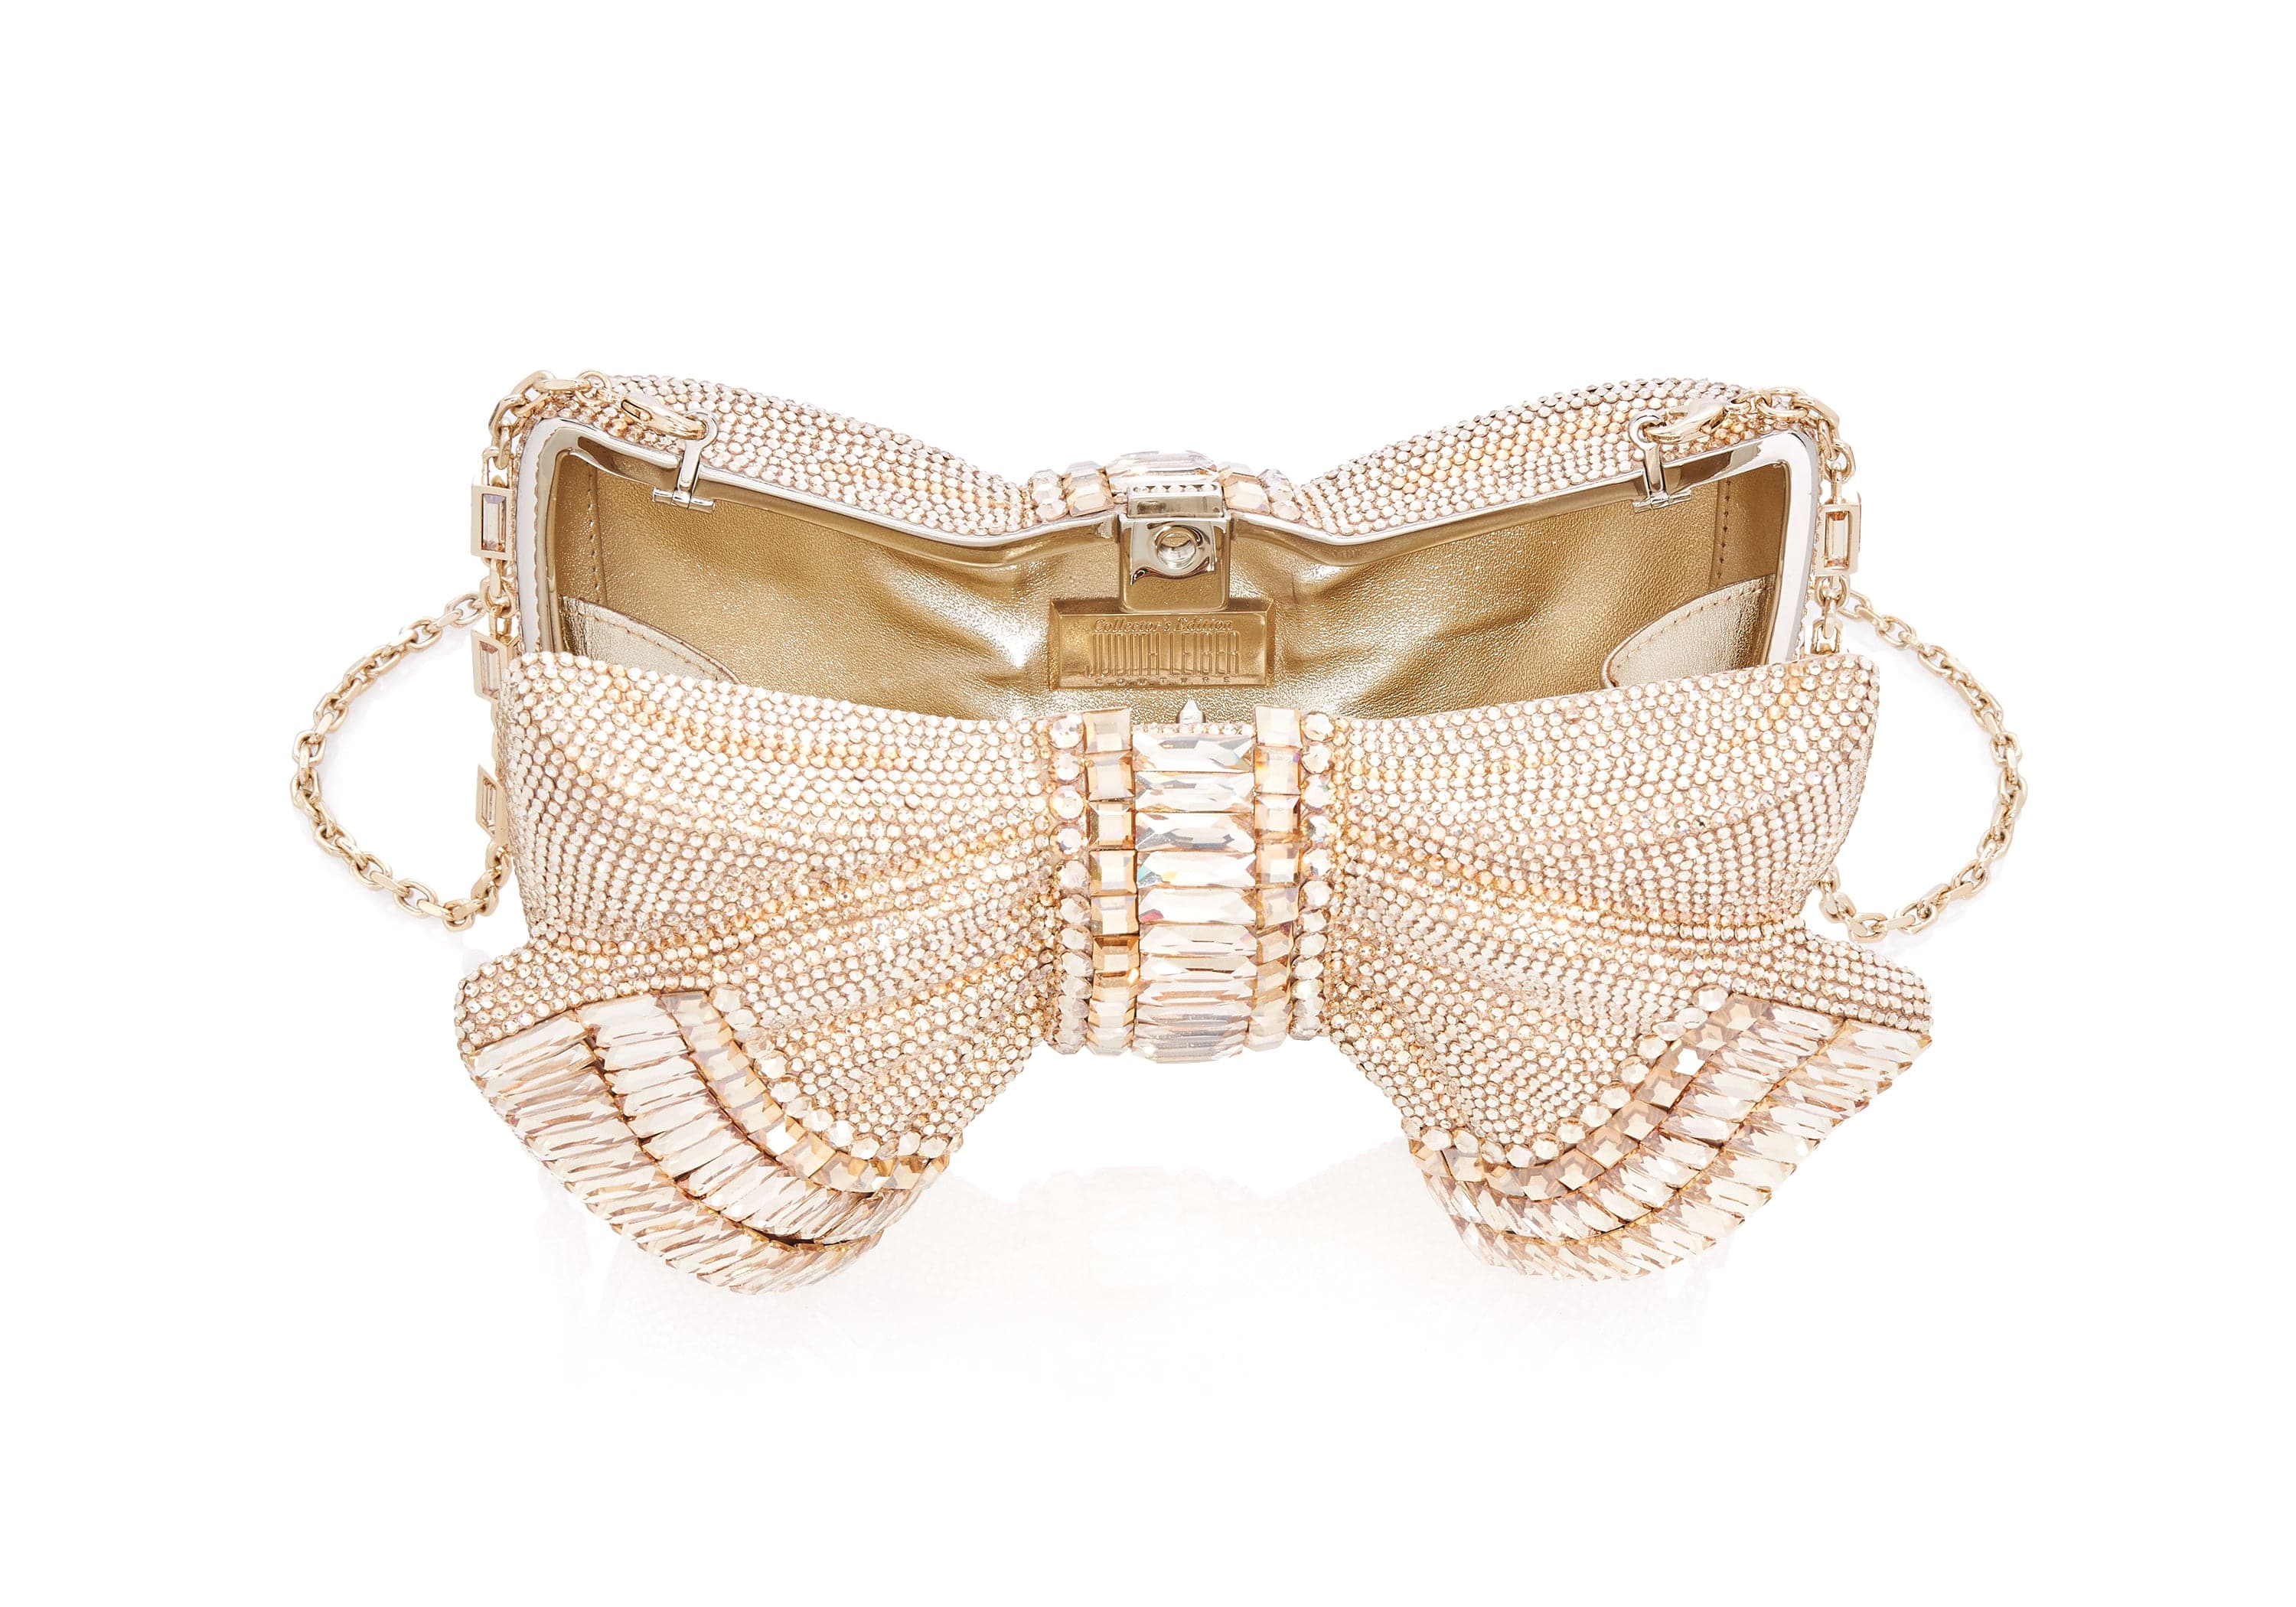 True Decadence ruched bow clutch bag in gold | ASOS